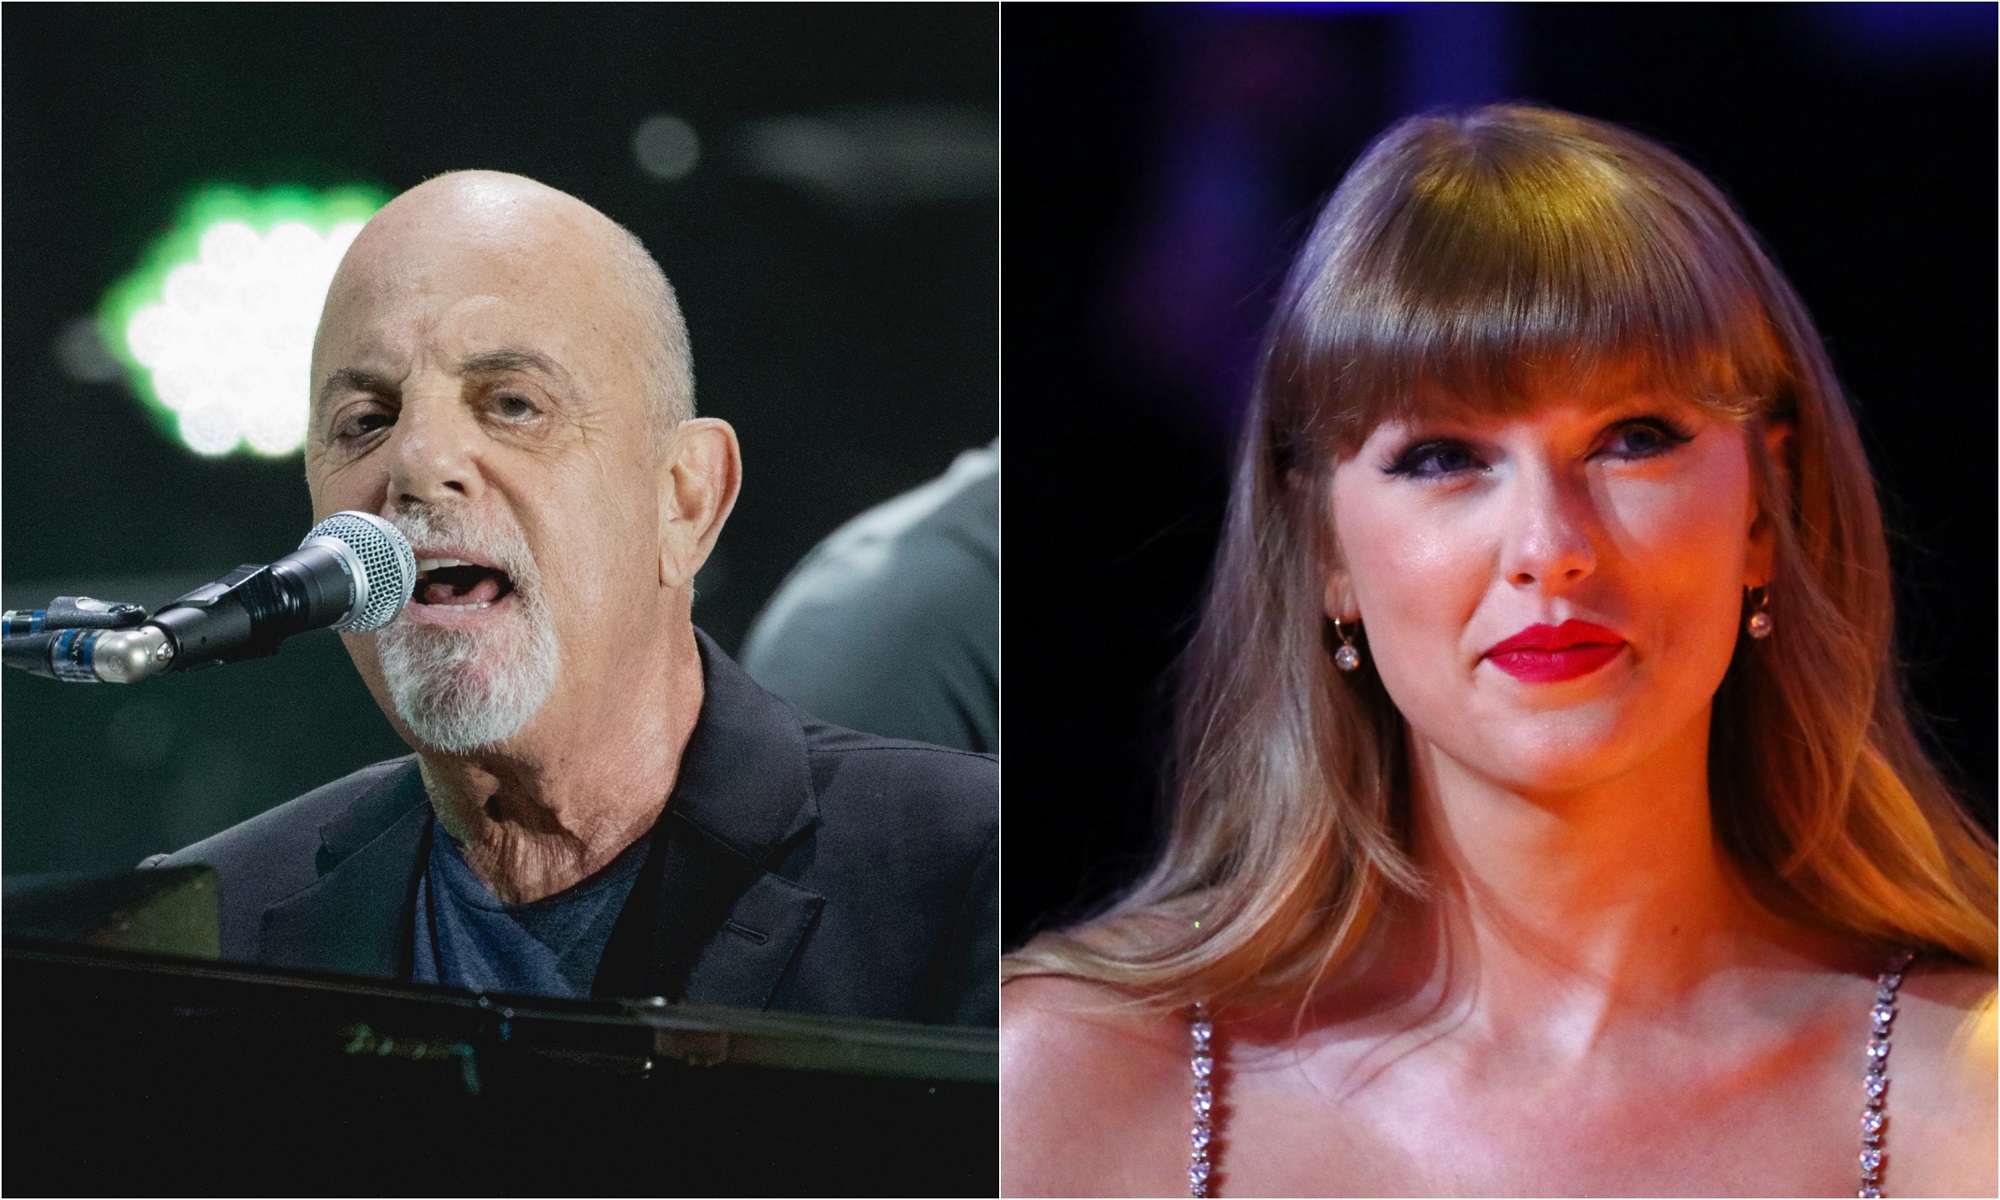 A joined photo of Billy Joel and Taylor Swift